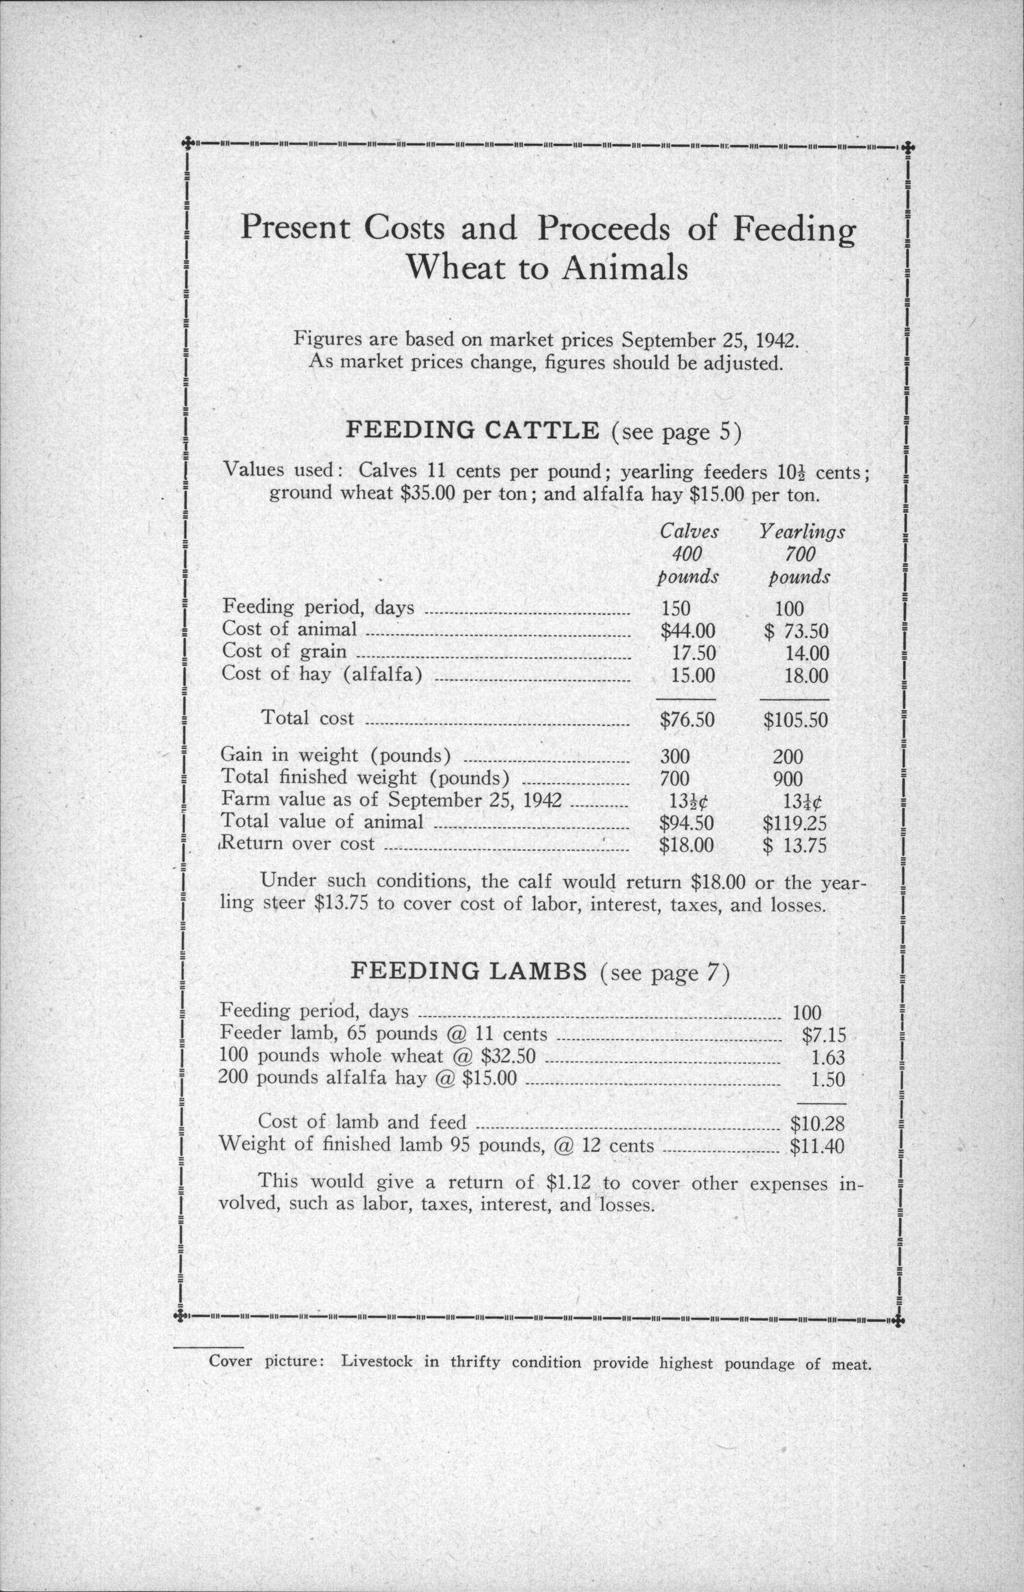 Present Costs and Proceeds of Feeding Wheat to Animals Figures are based on market prices September 25, 1942. As market prices change, figures should be adjusted.